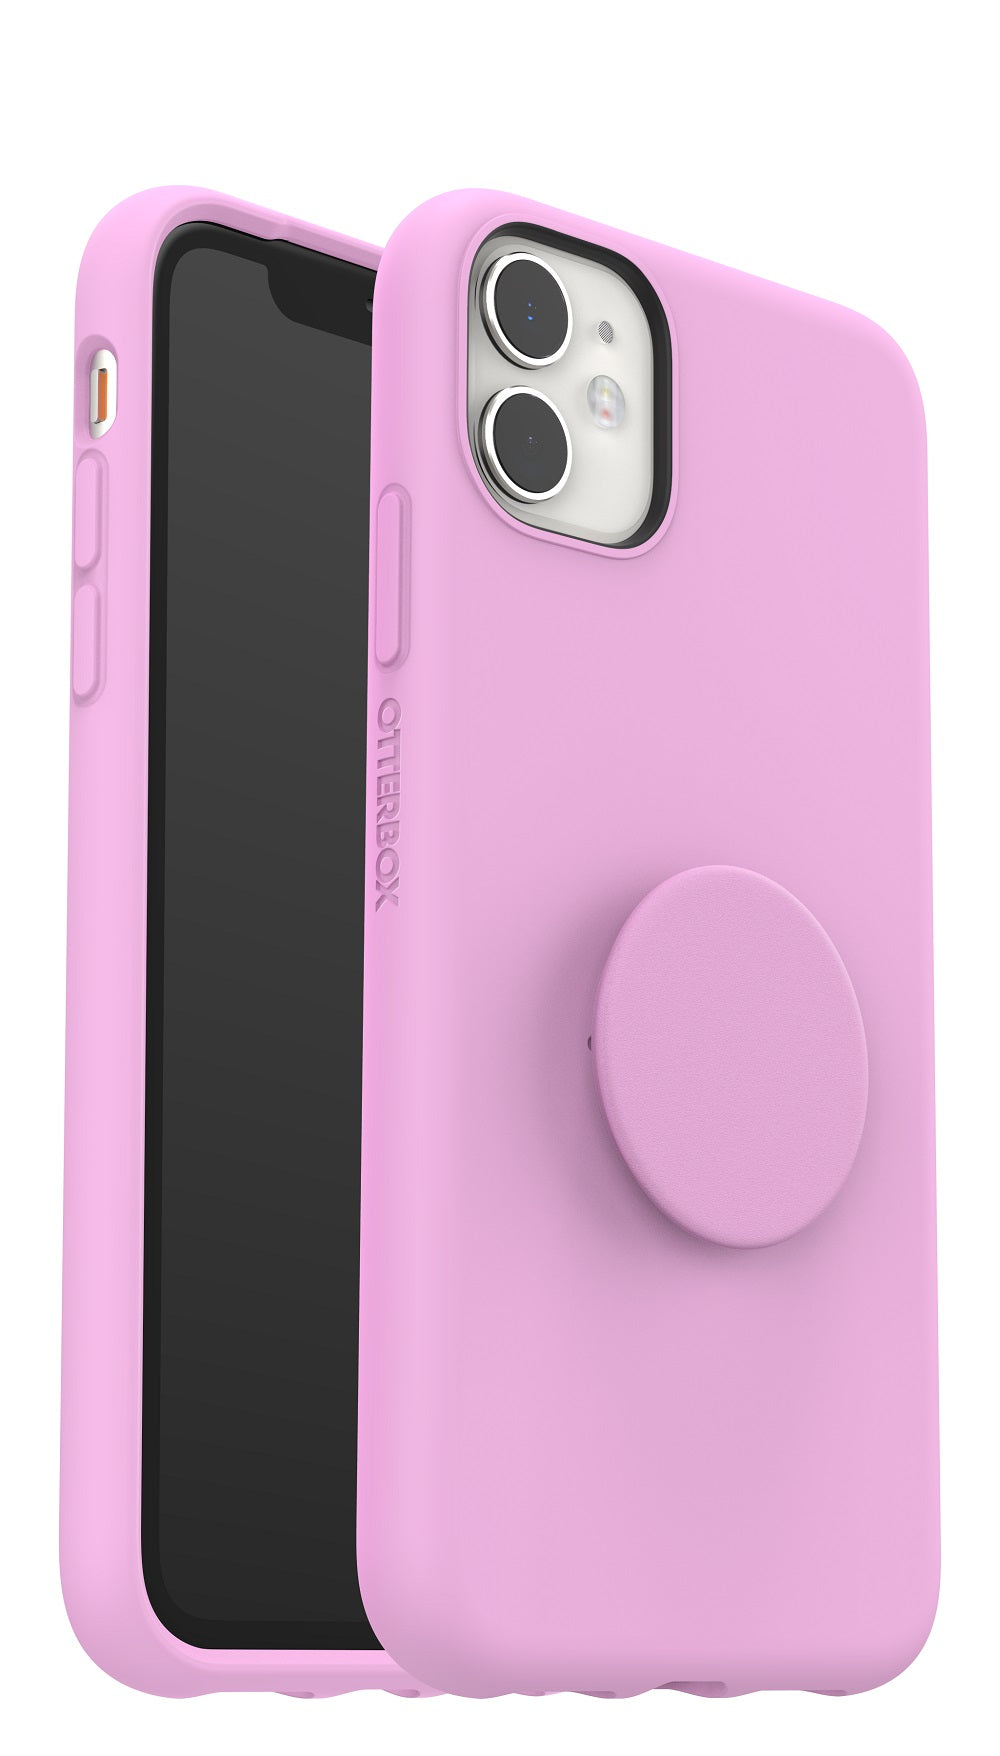 OtterBox + POP Ultra Slim Soft Touch Case for Apple iPhone 11 - Lavender Sour (New)